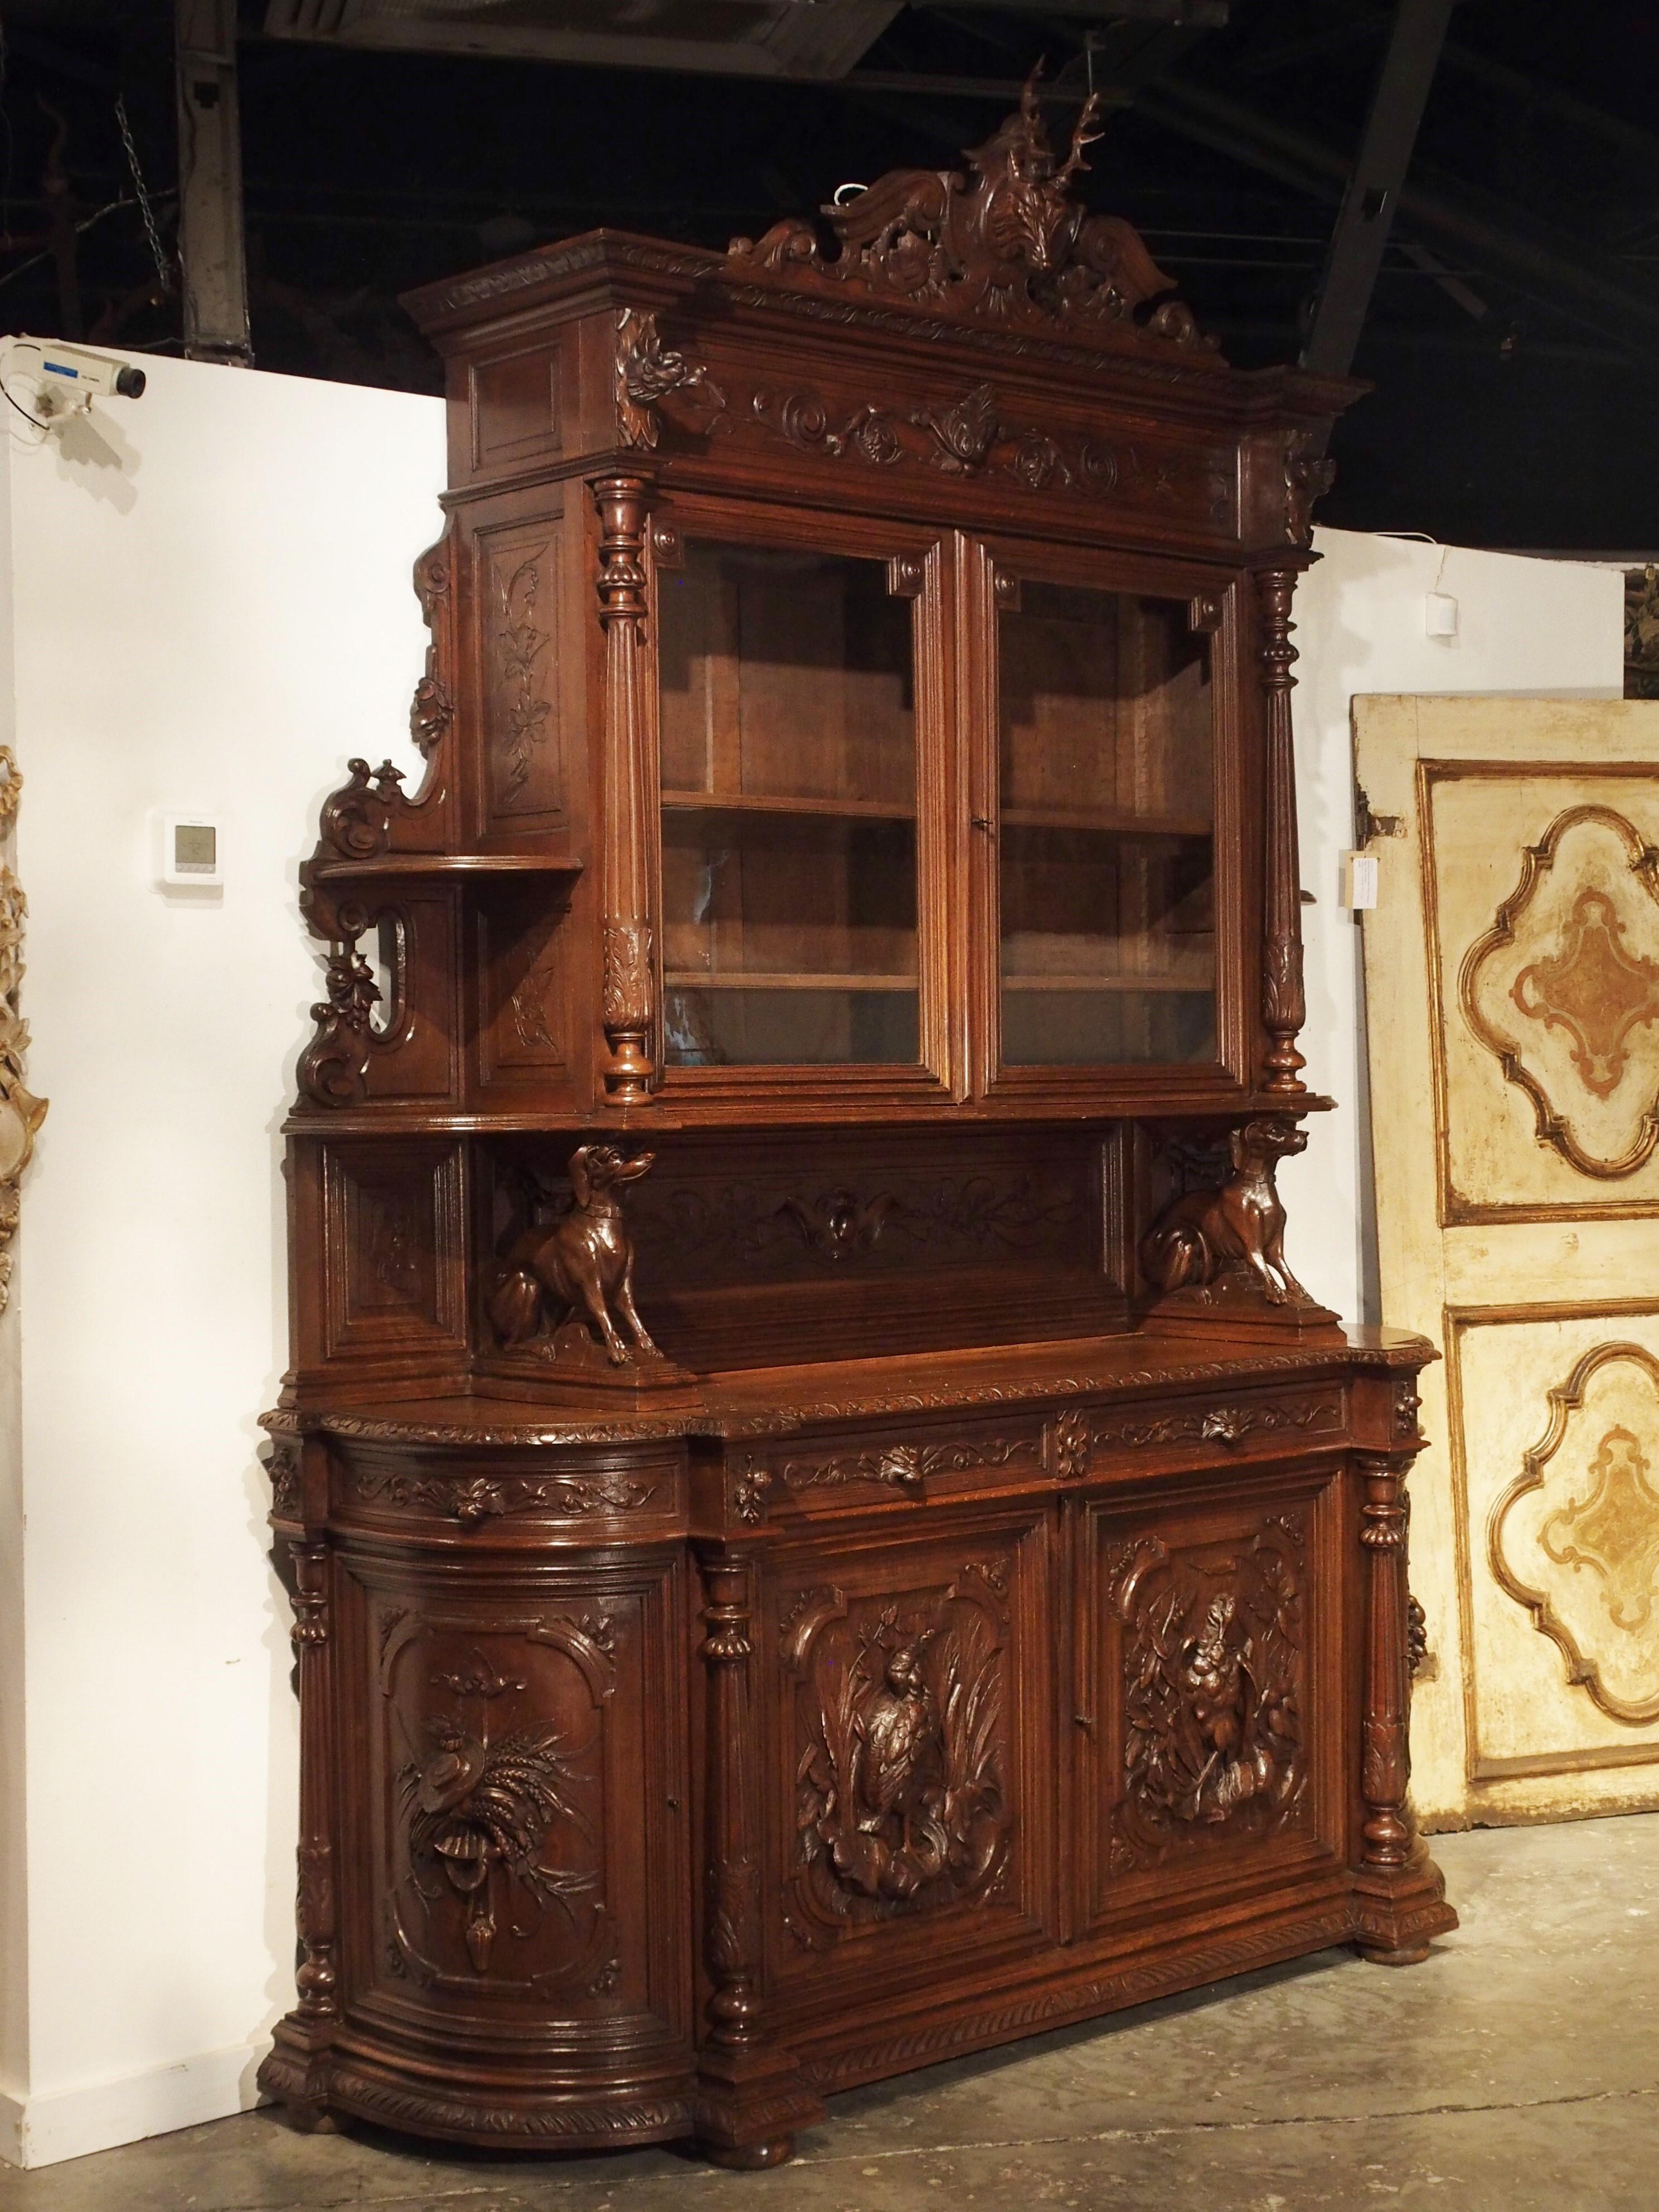 This fine French carved Buffet de Chasse has been made from oak, in the late 1800s. It would have originally been commissioned for a country Manoir or Chateau, where hunting and wildlife was always an important part of life. The main structure of